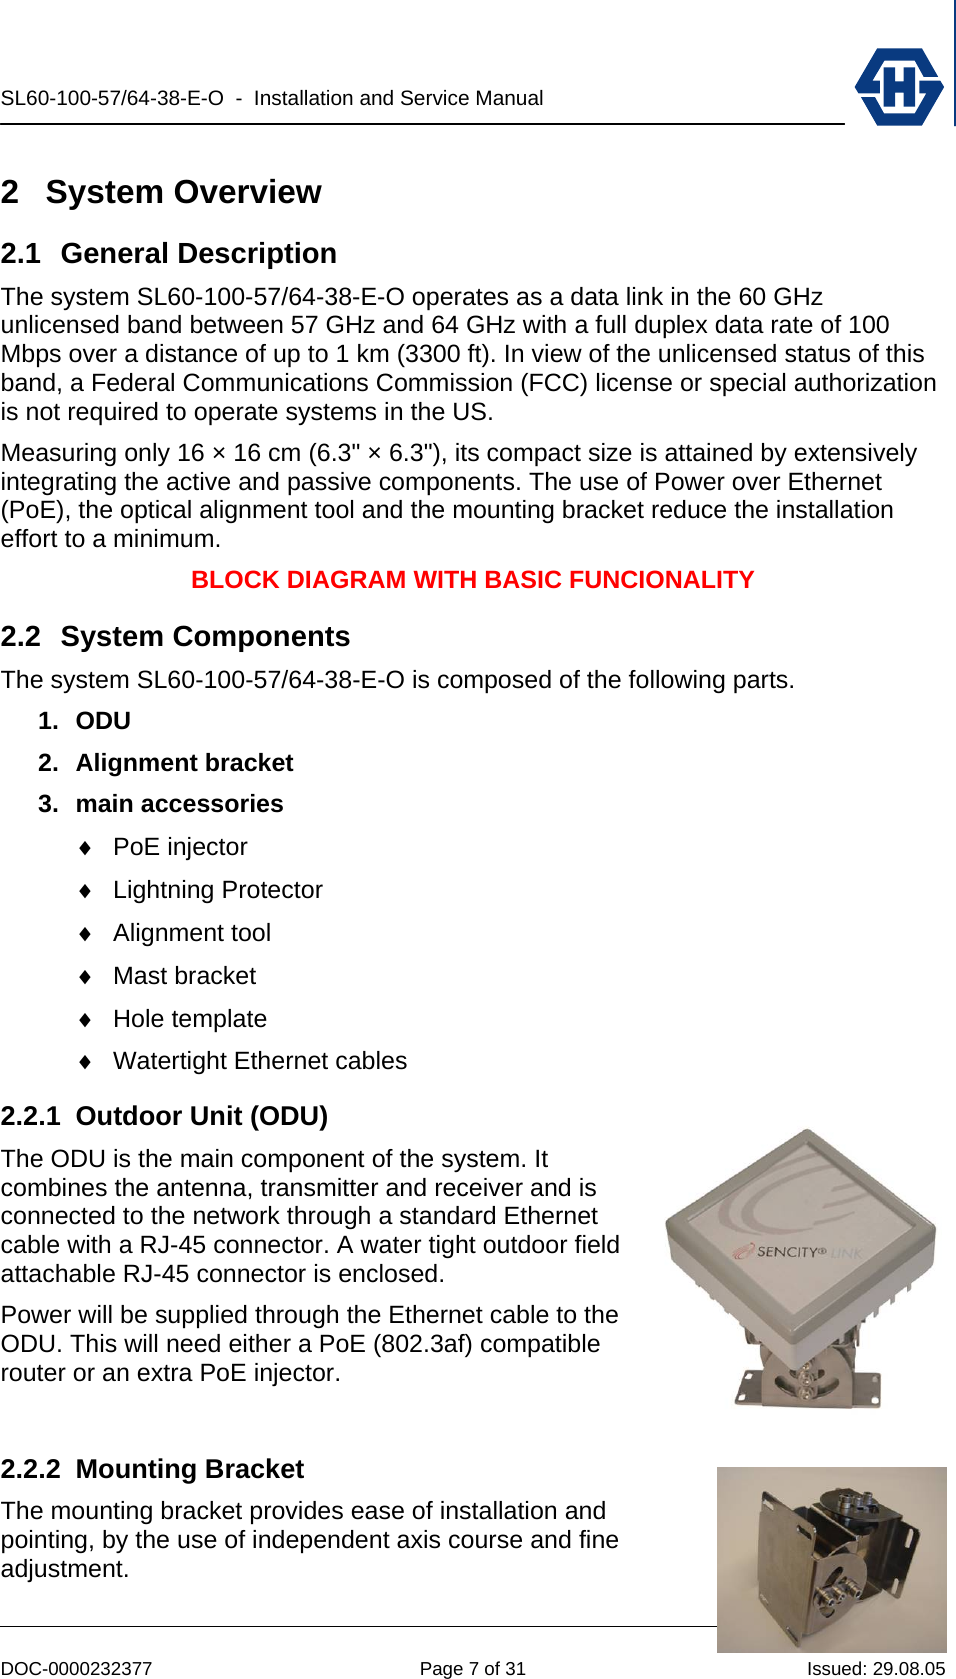 SL60-100-57/64-38-E-O  -  Installation and Service Manual   DOC-0000232377  Page 7 of 31  Issued: 29.08.05 2 System Overview 2.1  General Description  The system SL60-100-57/64-38-E-O operates as a data link in the 60 GHz unlicensed band between 57 GHz and 64 GHz with a full duplex data rate of 100 Mbps over a distance of up to 1 km (3300 ft). In view of the unlicensed status of this band, a Federal Communications Commission (FCC) license or special authorization is not required to operate systems in the US. Measuring only 16 × 16 cm (6.3&quot; × 6.3&quot;), its compact size is attained by extensively integrating the active and passive components. The use of Power over Ethernet (PoE), the optical alignment tool and the mounting bracket reduce the installation effort to a minimum. BLOCK DIAGRAM WITH BASIC FUNCIONALITY 2.2 System Components The system SL60-100-57/64-38-E-O is composed of the following parts. 1. ODU 2. Alignment bracket 3. main accessories ♦ PoE injector ♦ Lightning Protector ♦ Alignment tool ♦ Mast bracket ♦ Hole template ♦ Watertight Ethernet cables 2.2.1  Outdoor Unit (ODU) The ODU is the main component of the system. It combines the antenna, transmitter and receiver and is connected to the network through a standard Ethernet cable with a RJ-45 connector. A water tight outdoor field attachable RJ-45 connector is enclosed. Power will be supplied through the Ethernet cable to the ODU. This will need either a PoE (802.3af) compatible router or an extra PoE injector.  2.2.2 Mounting Bracket The mounting bracket provides ease of installation and pointing, by the use of independent axis course and fine adjustment. 